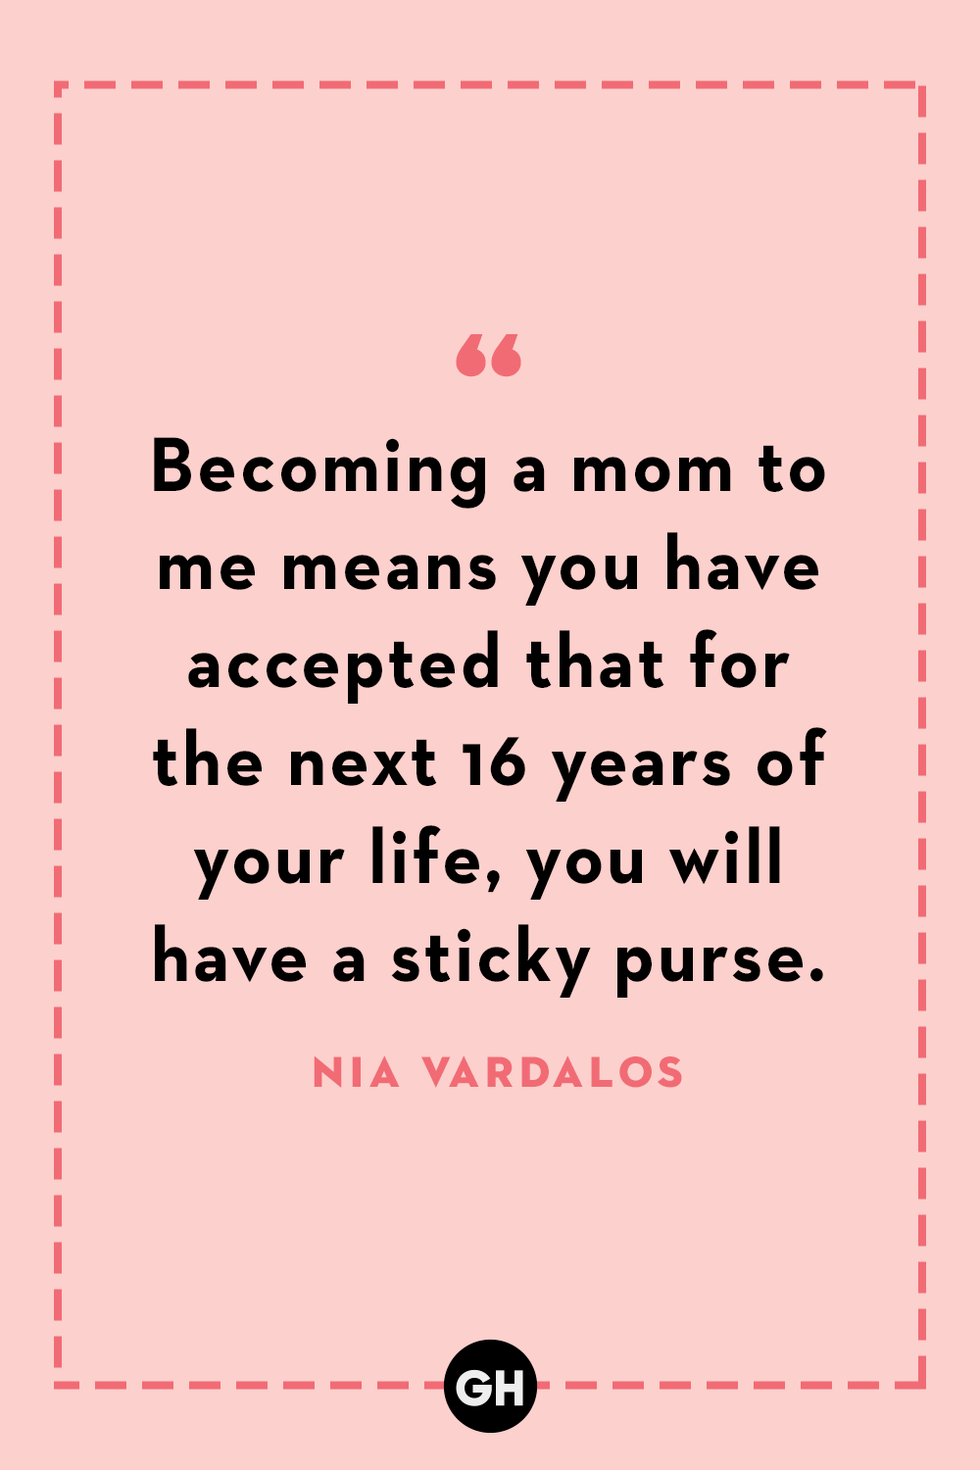 a mother's day quote in an designed illustration